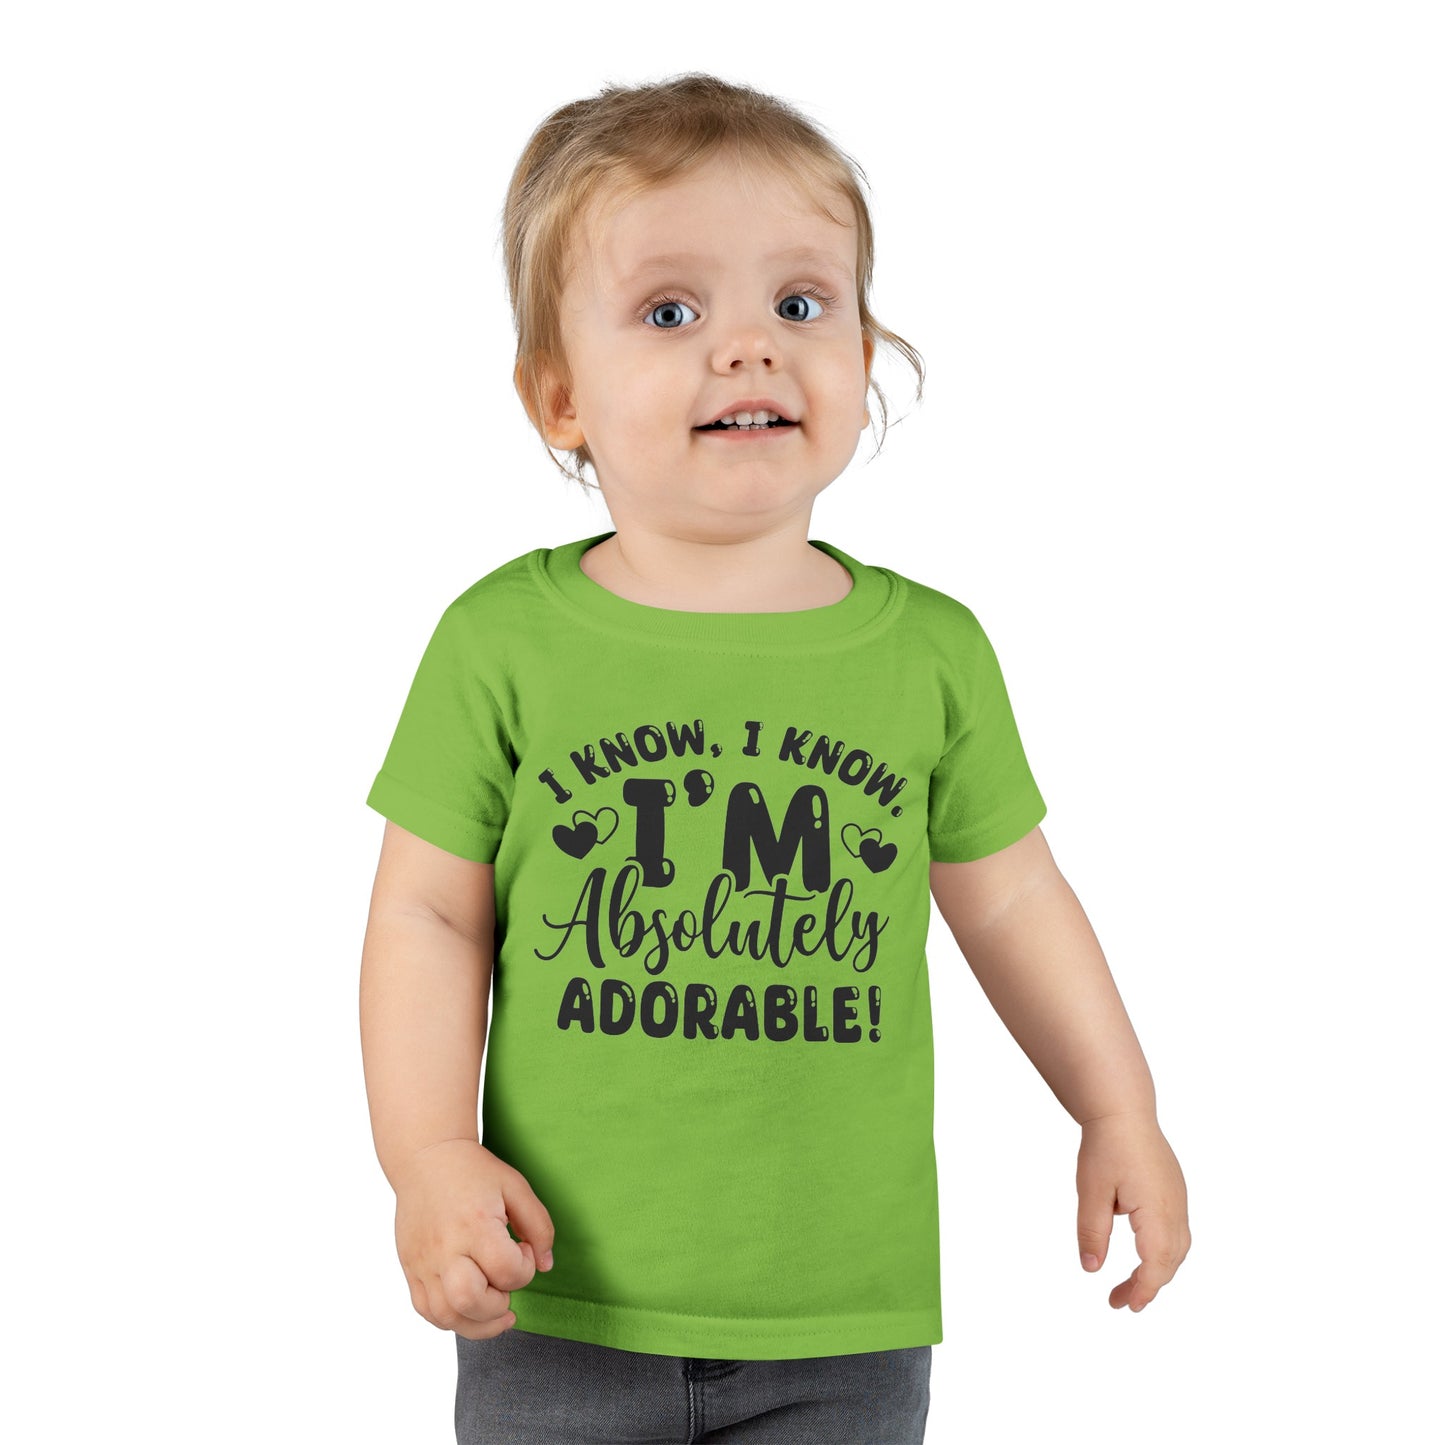 "Absolutely Adorable" Toddler T-shirt